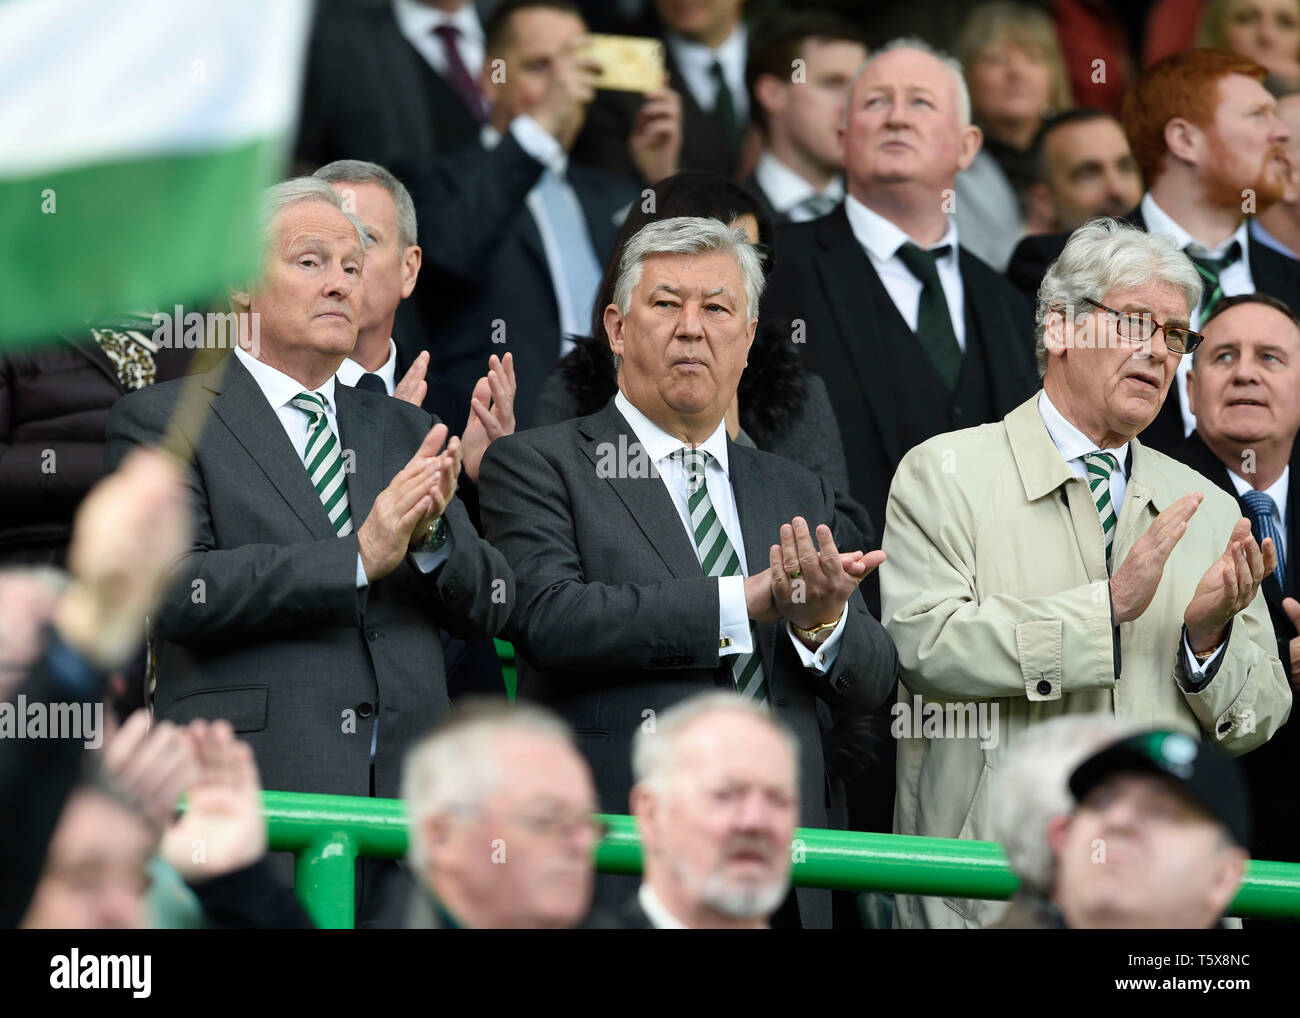 Celtic Chief Executive Peter Lawwell (centre) during the applause for ...